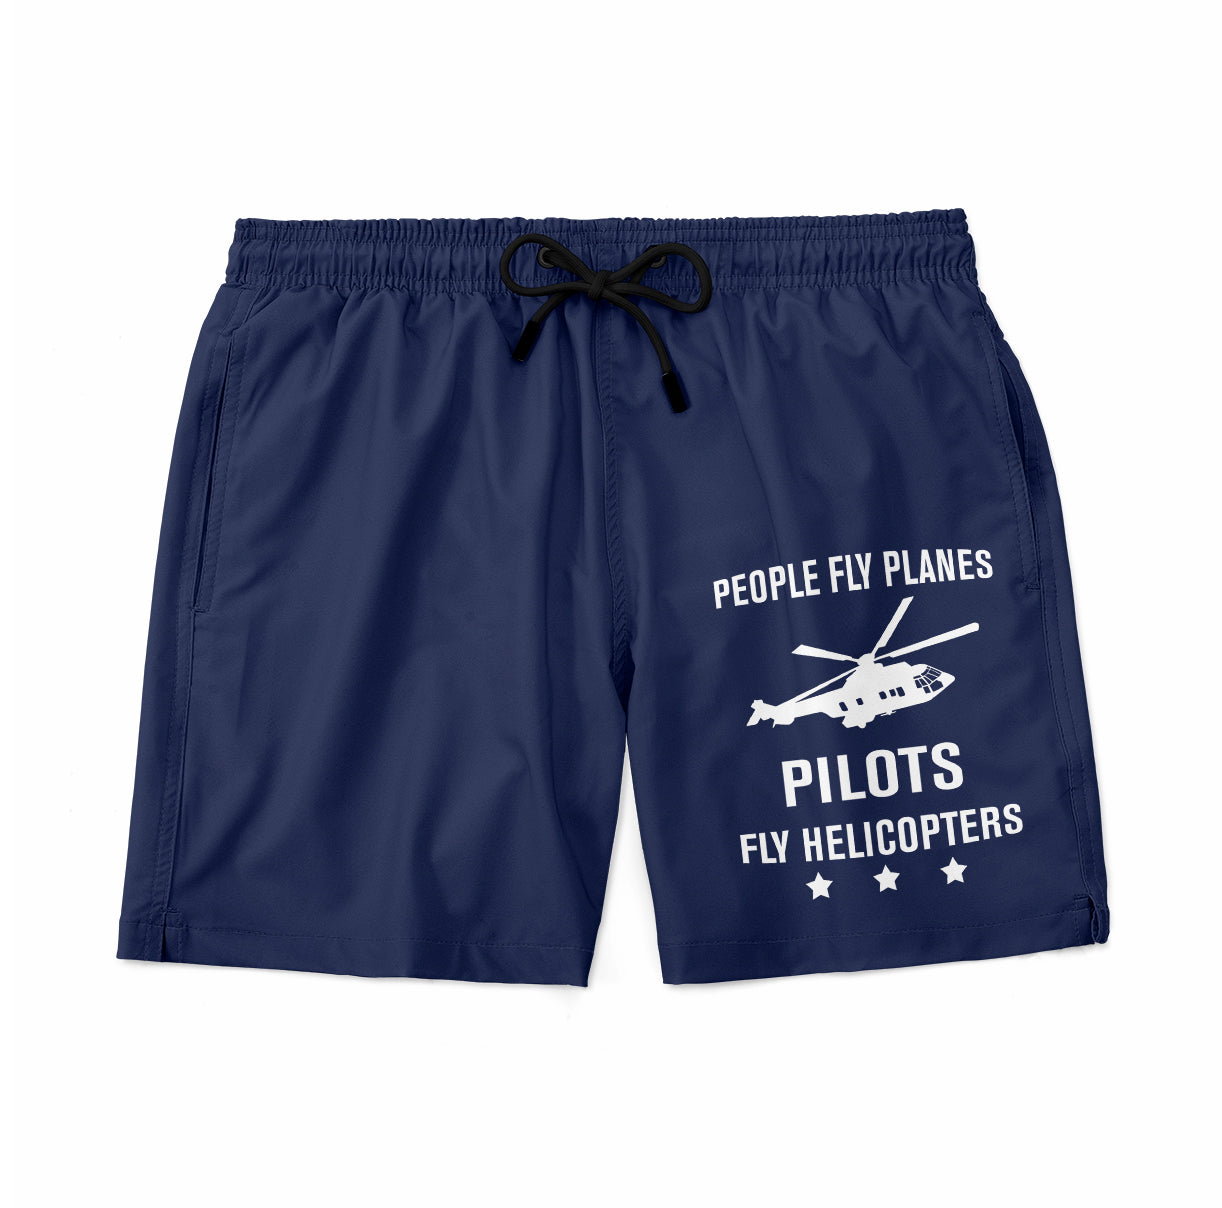 People Fly Planes Pilots Fly Helicopters Designed Swim Trunks & Shorts